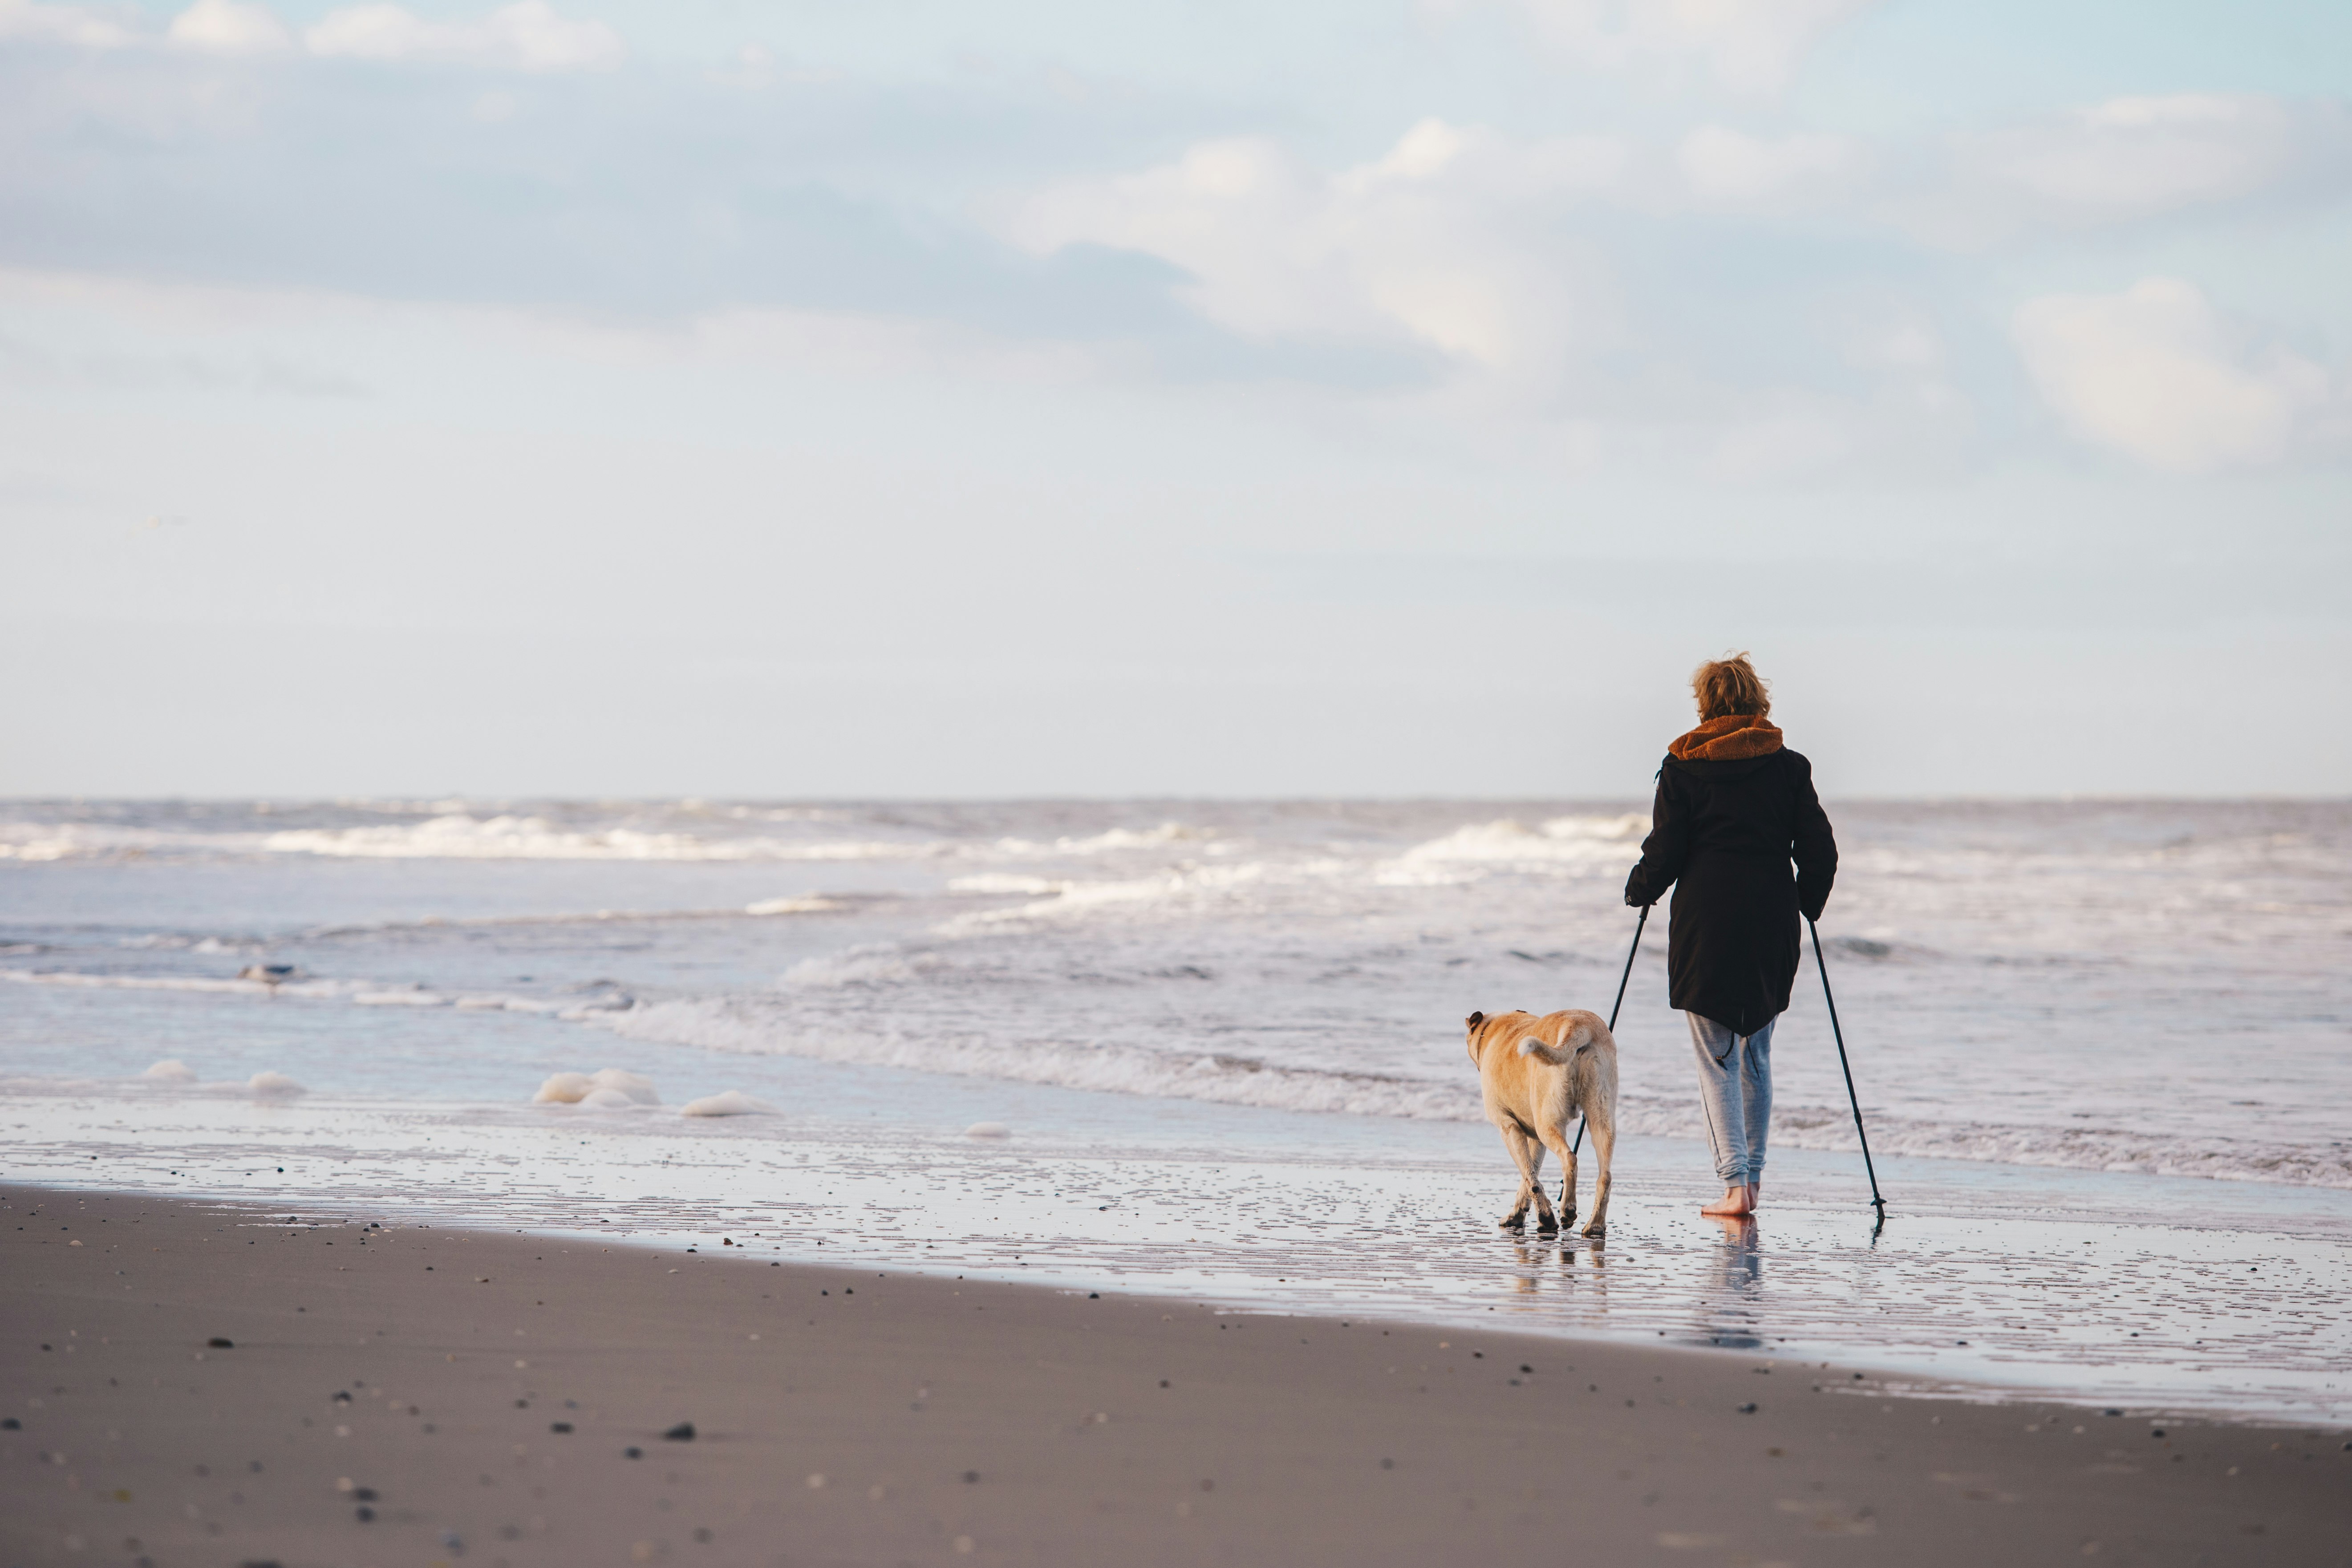 woman in black jacket walking with dog on beach during daytime